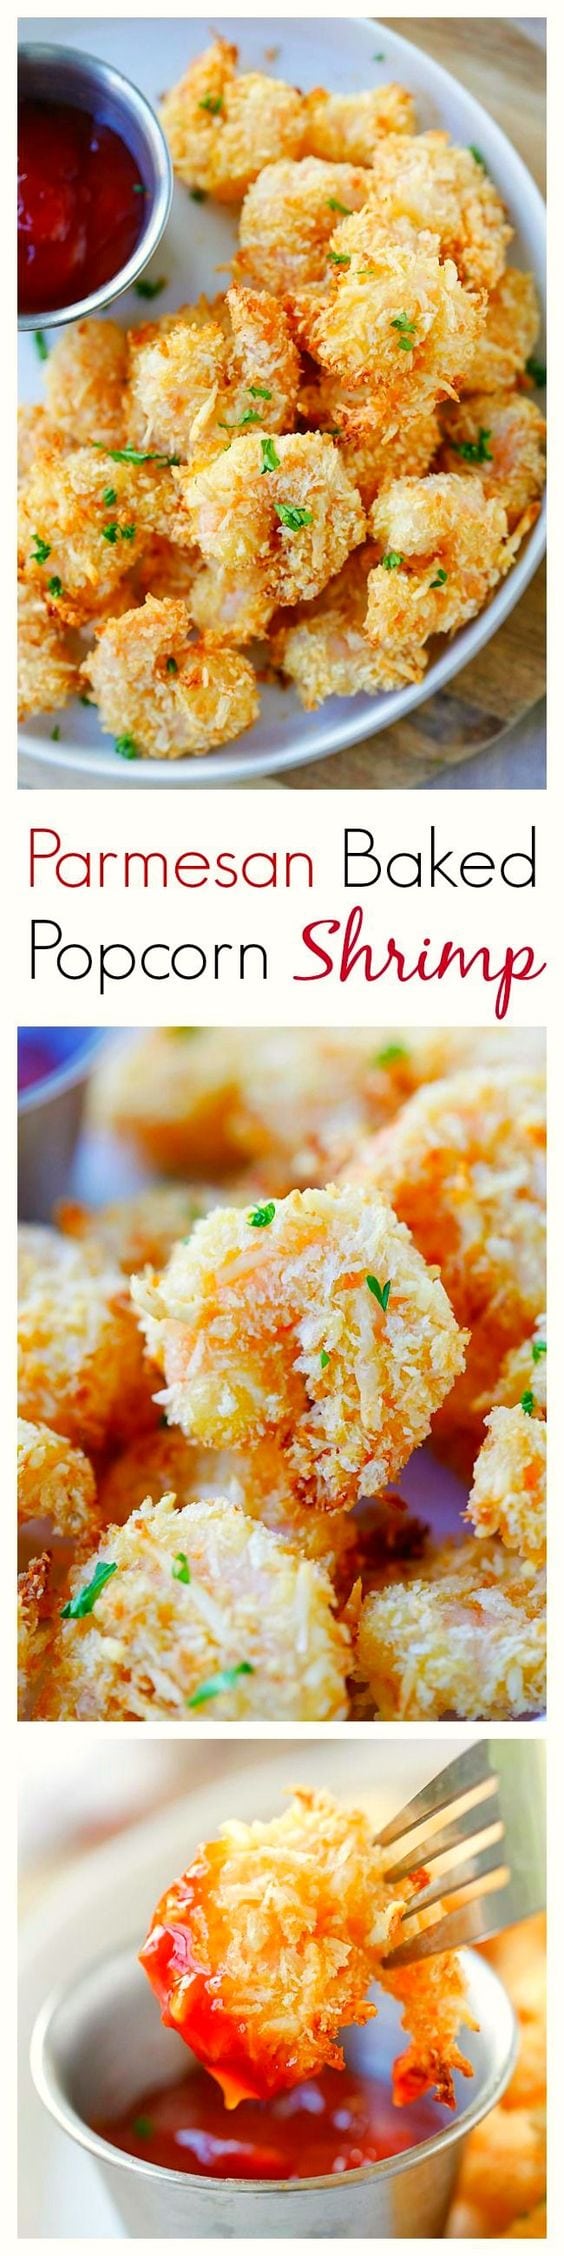 Parmesan Baked Popcorn Shrimp – Easiest and crispiest popcorn shrimp with no deep frying. Easy, healthy, super yummy | rasamalaysia.com